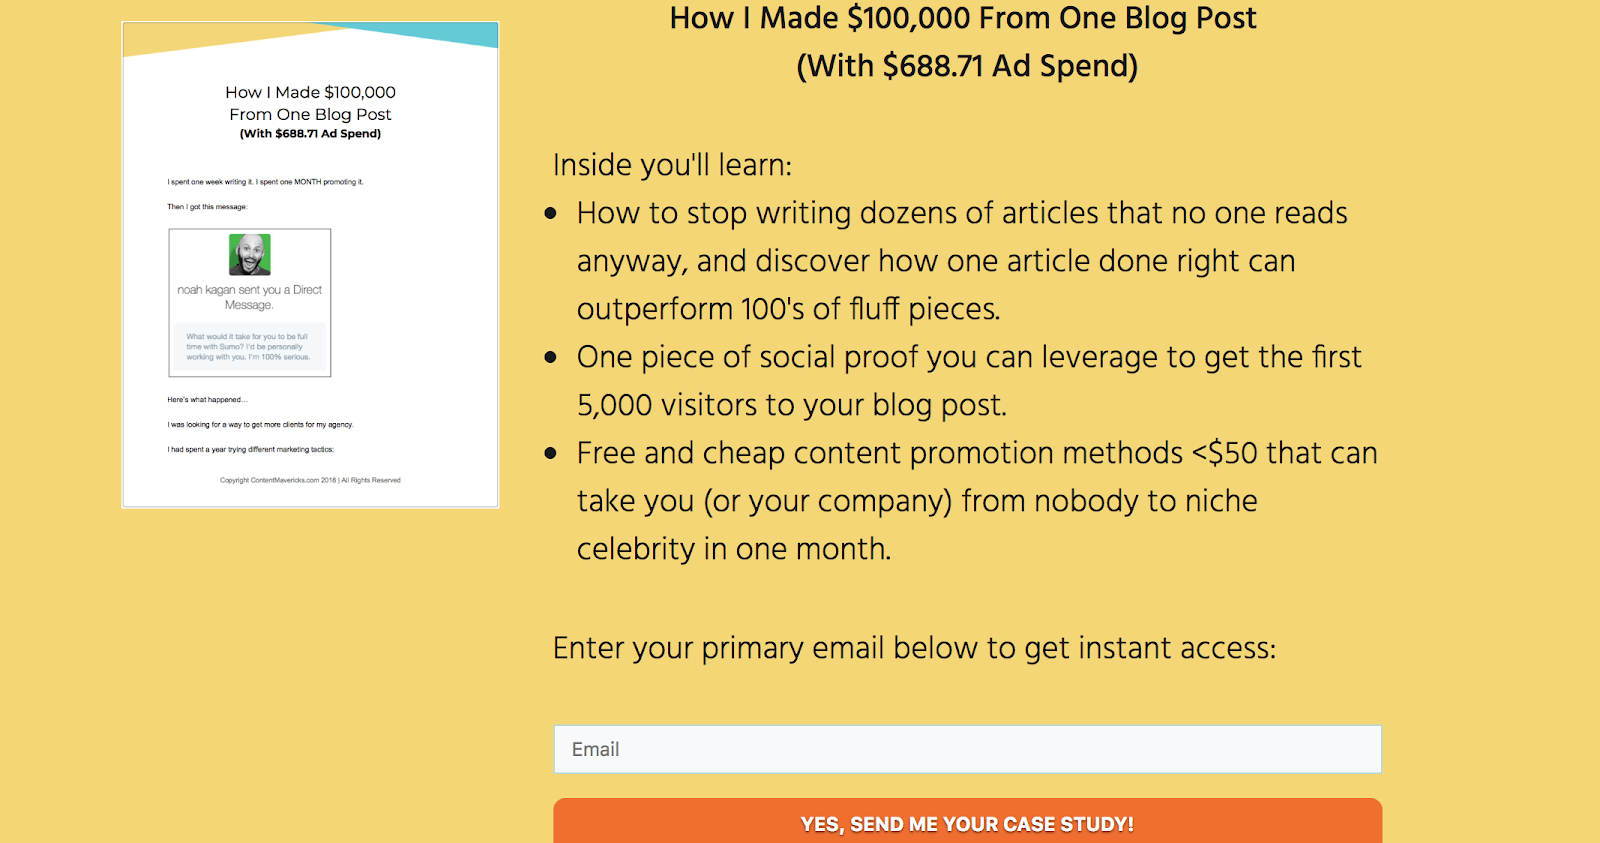 confirmation landing page - How I made $100,000 from one blog post